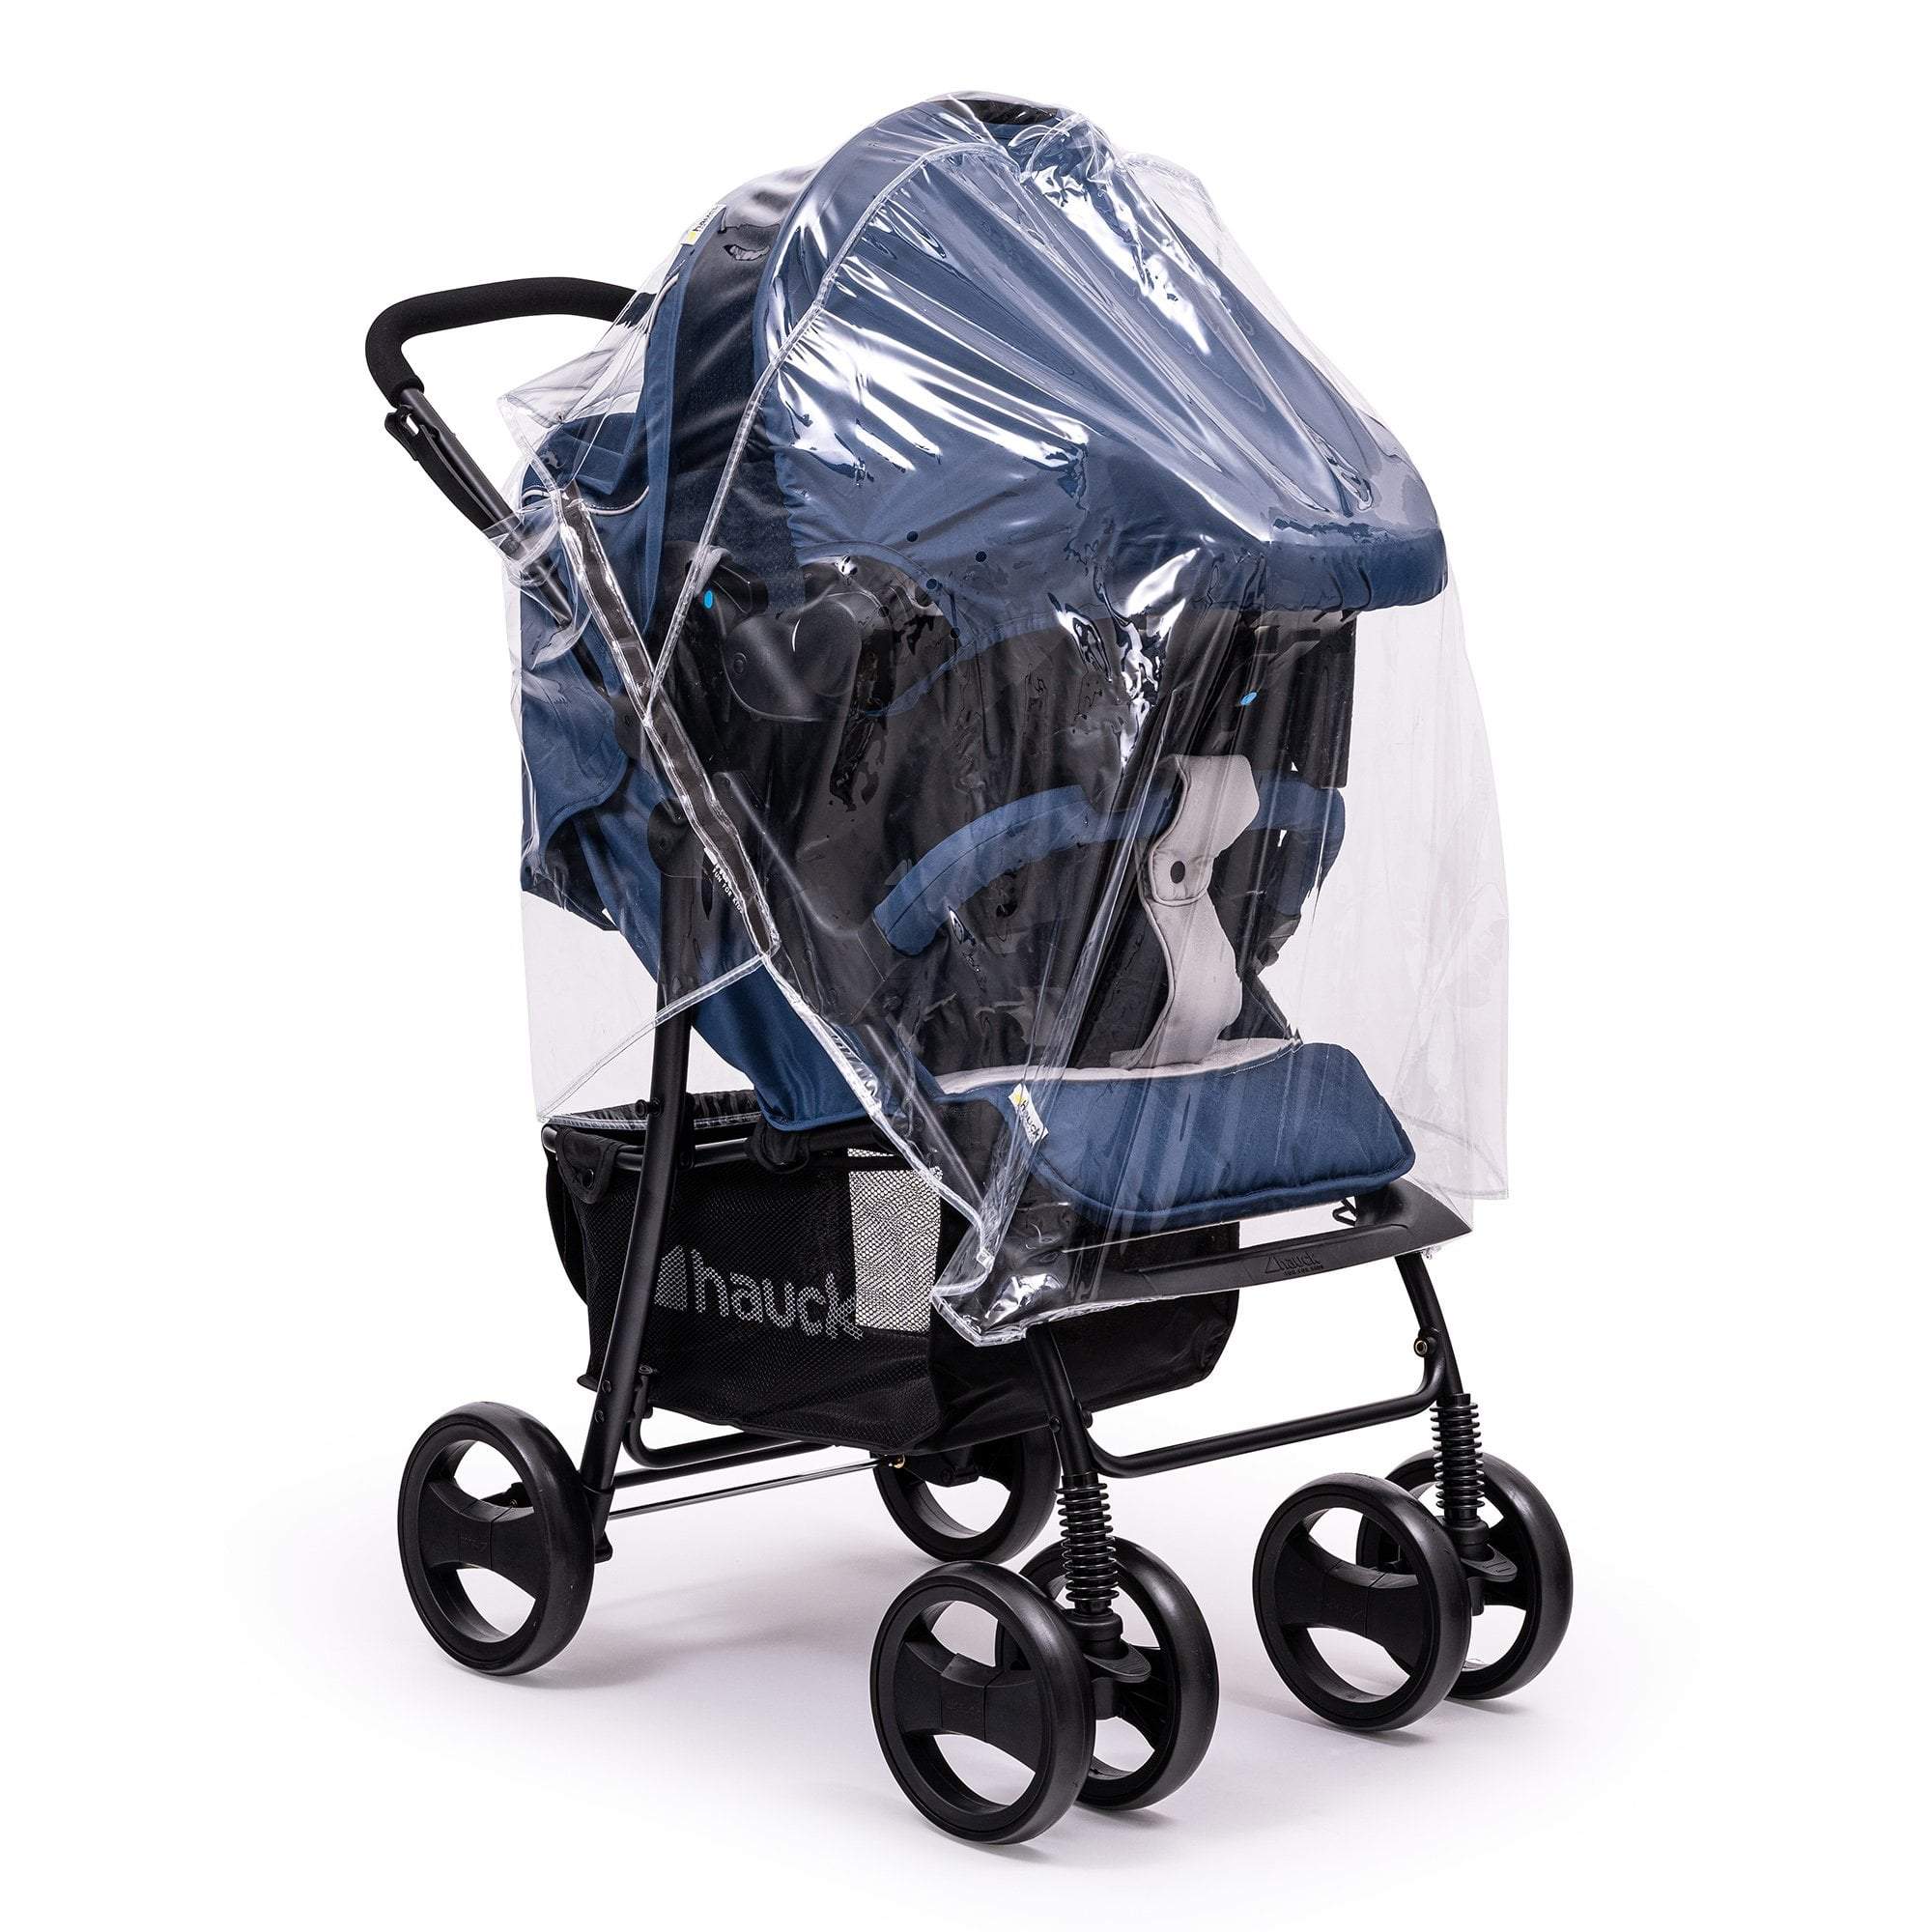 Travel System Raincover Compatible with Kiddicouture - Fits All Models - For Your Little One